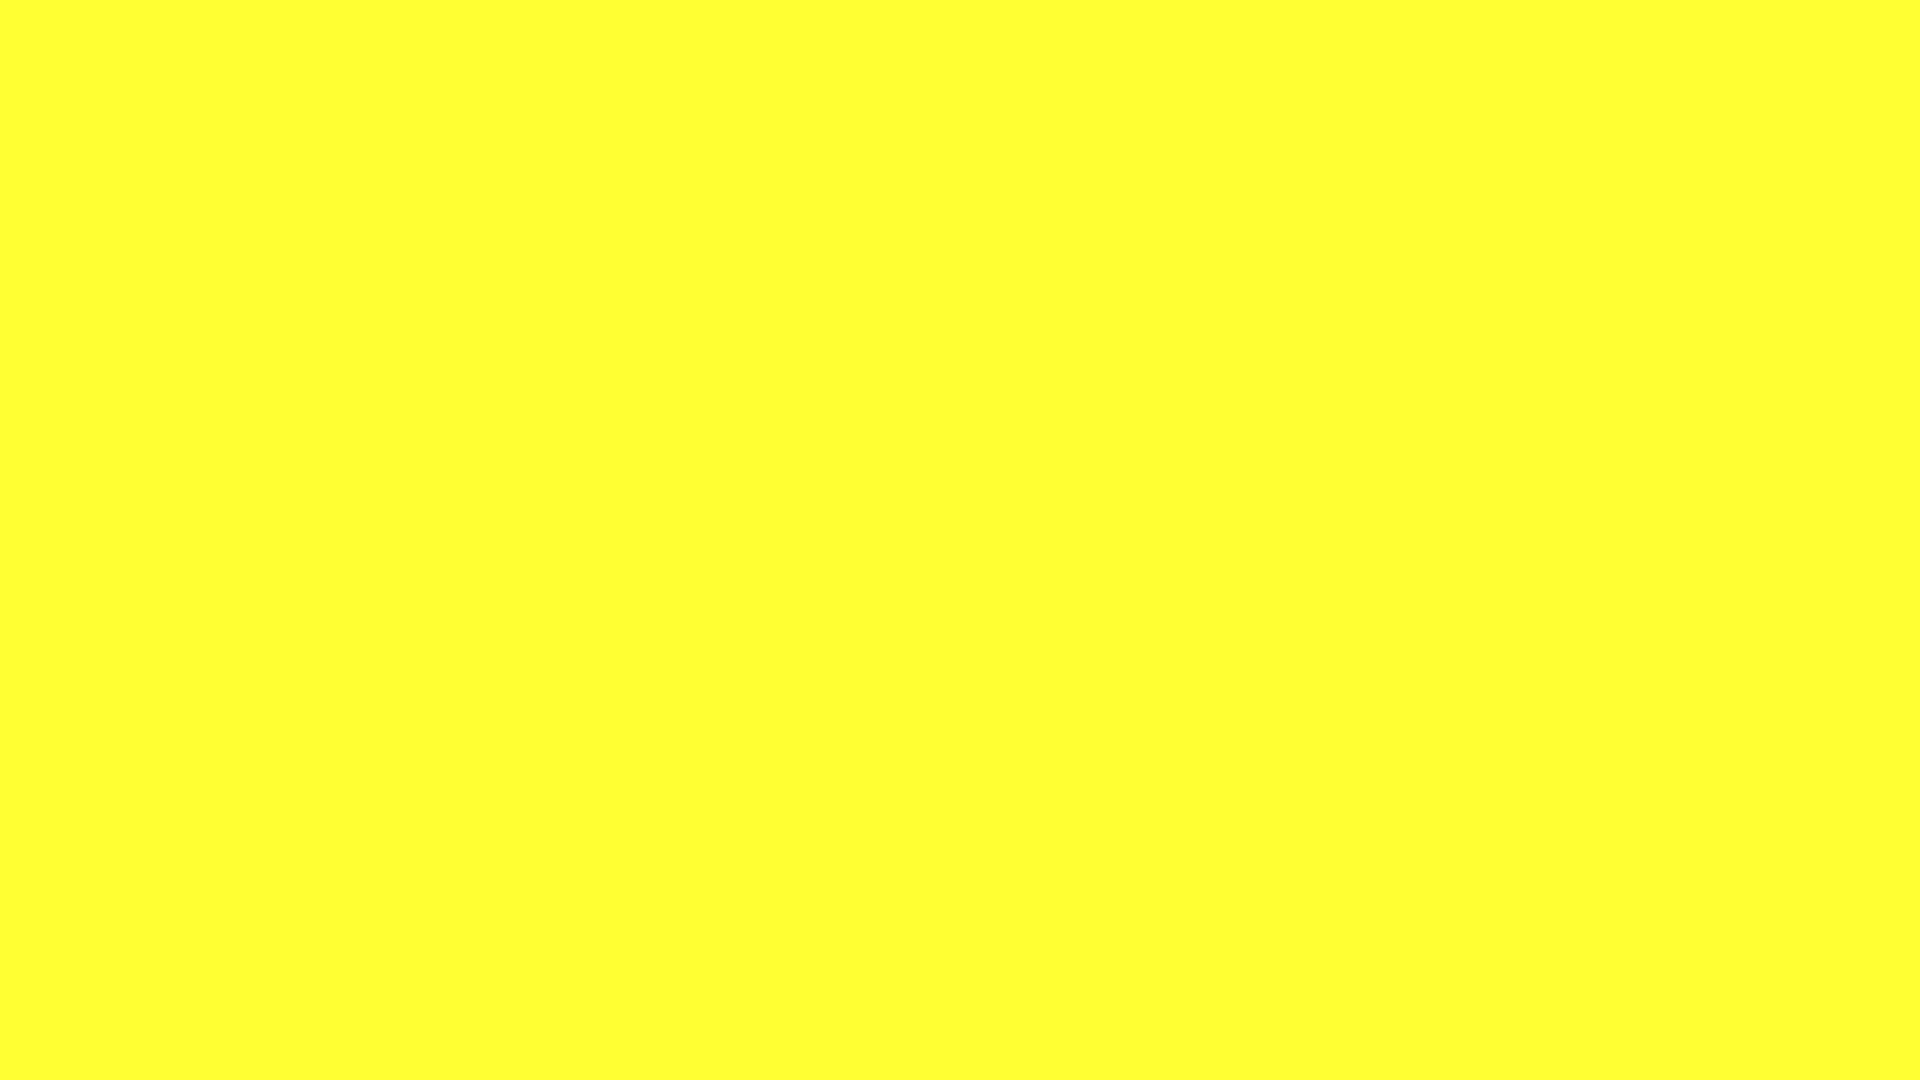 Wallpaper Plain Yellow Desktop with image resolution 1920x1080 pixel. You can use this wallpaper as background for your desktop Computer Screensavers, Android or iPhone smartphones